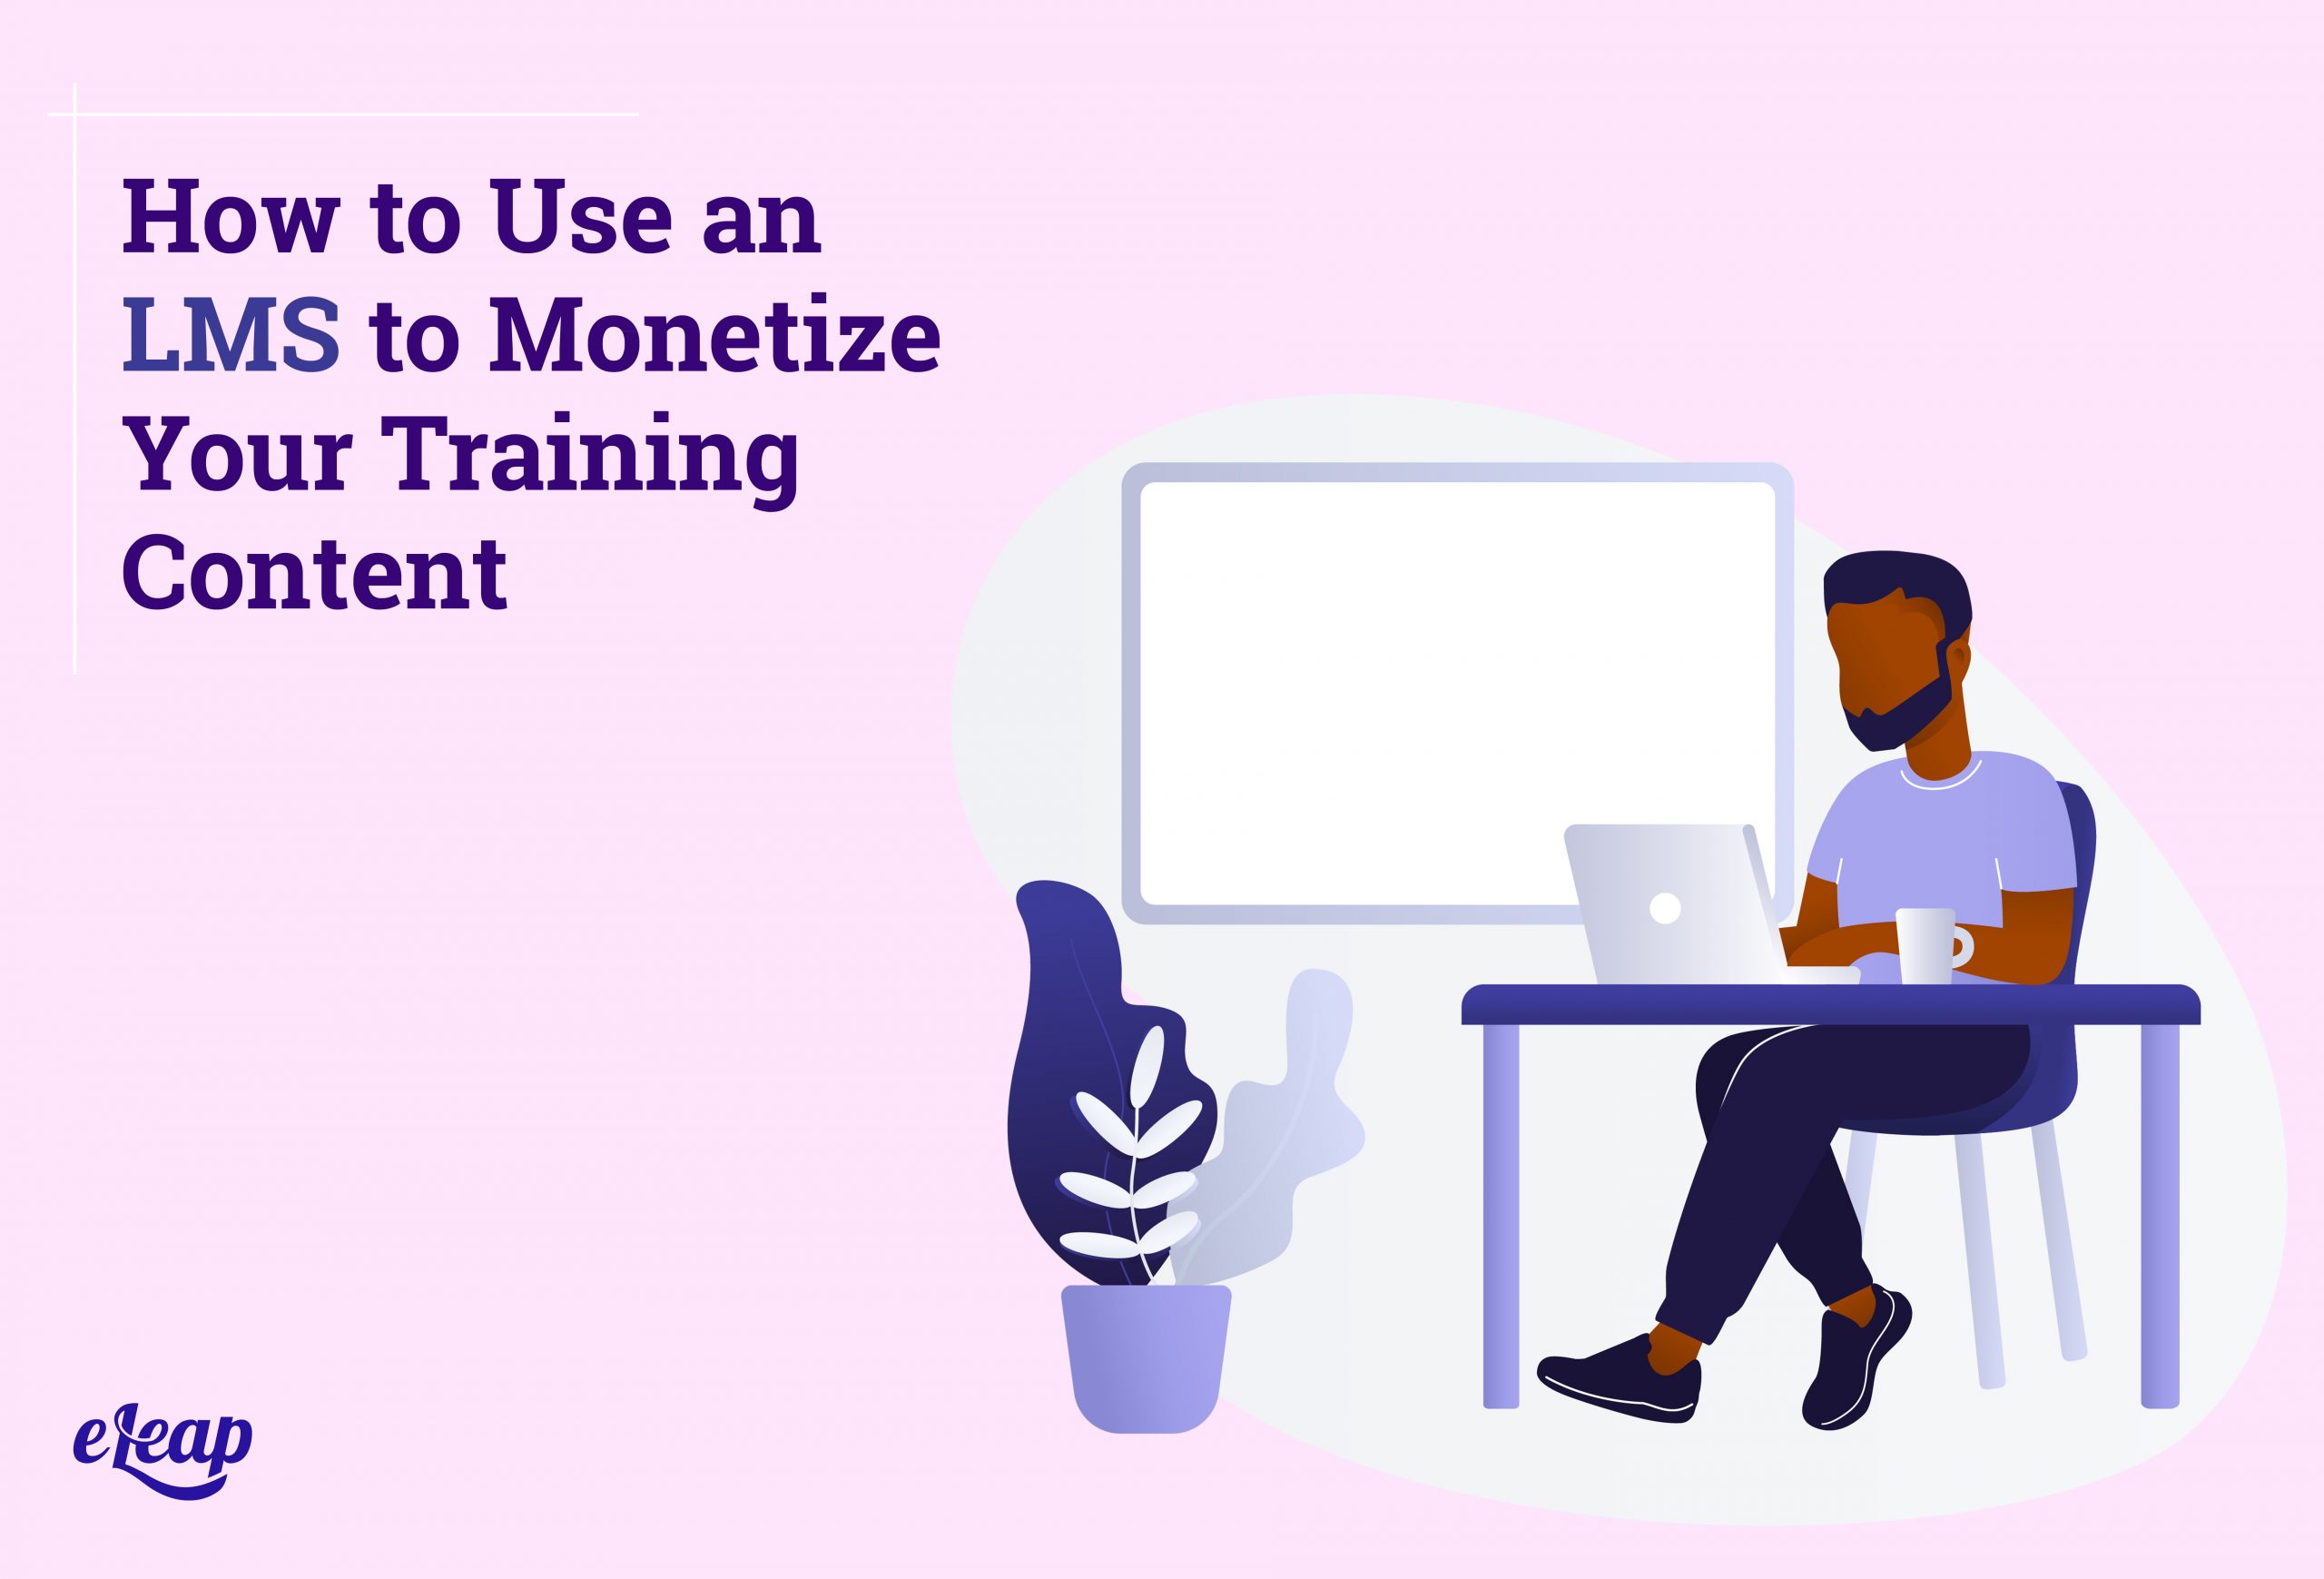 How to Use an LMS to Monetize Your Training Content